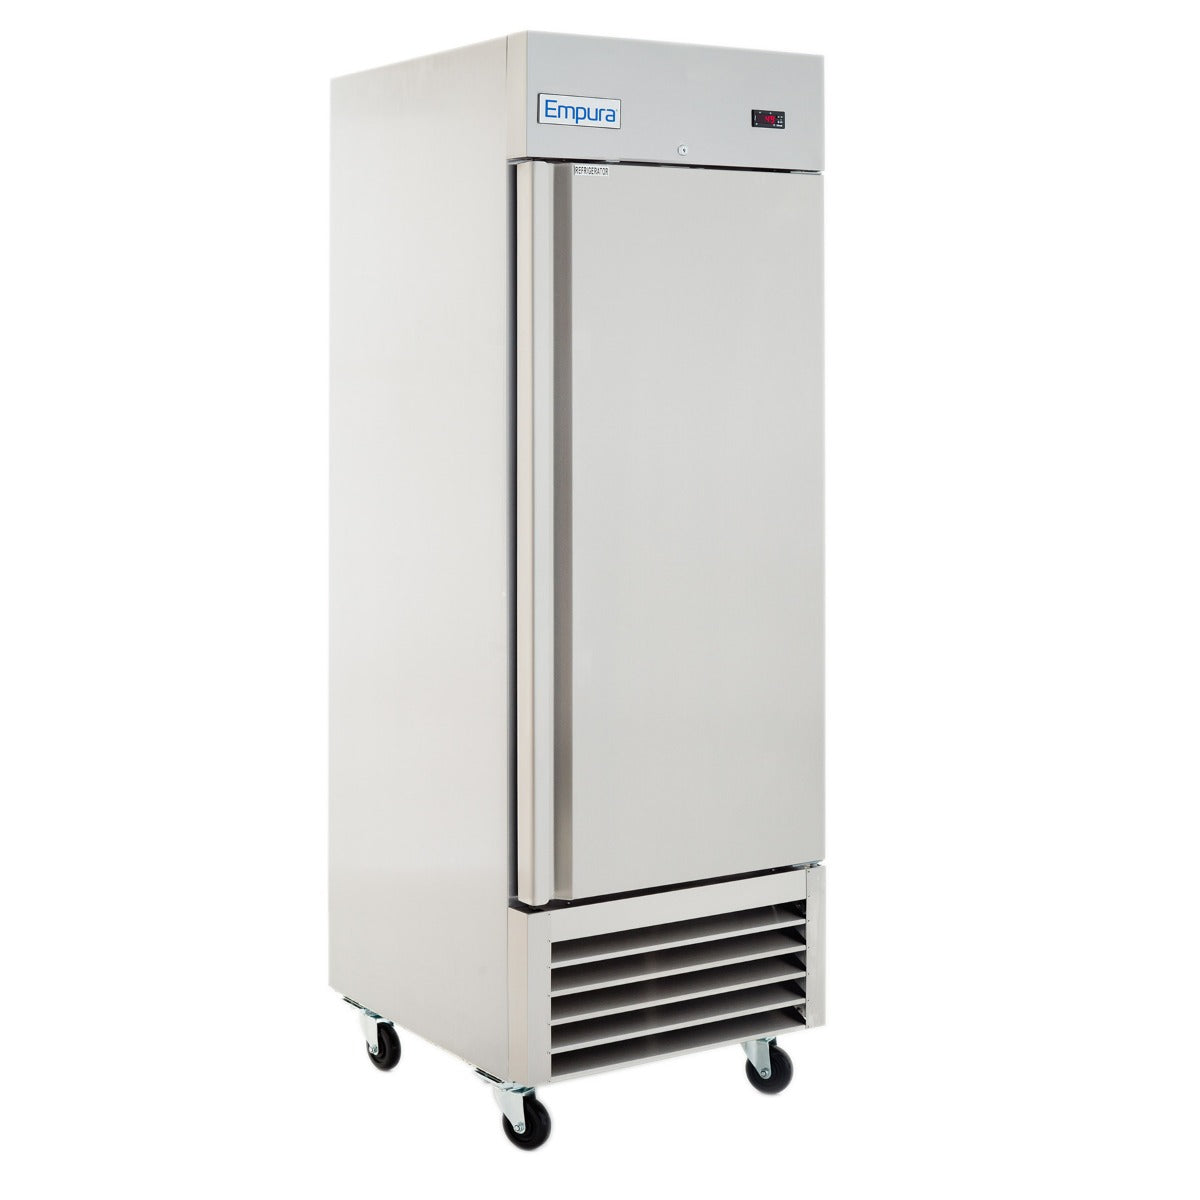 Empura E-KB27F 26.8" One-Section Stainless Steel Reach-In Freezer with 1 Full-Height Solid Door - 17.8 Cu Ft, 115 Volts